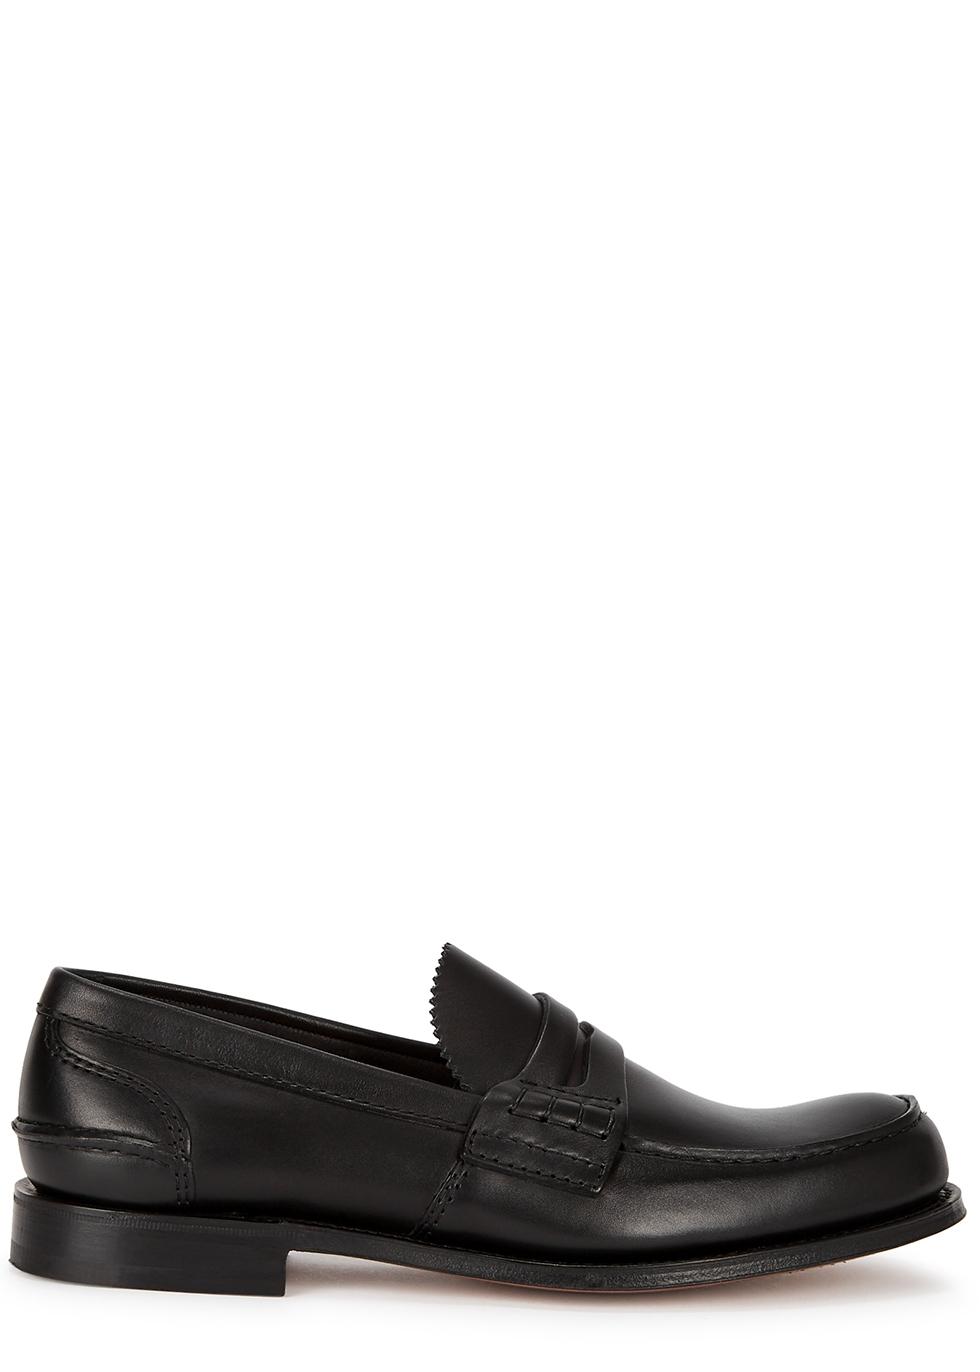 Church's Pembrey Black Leather Penny Loafers for Men - Lyst